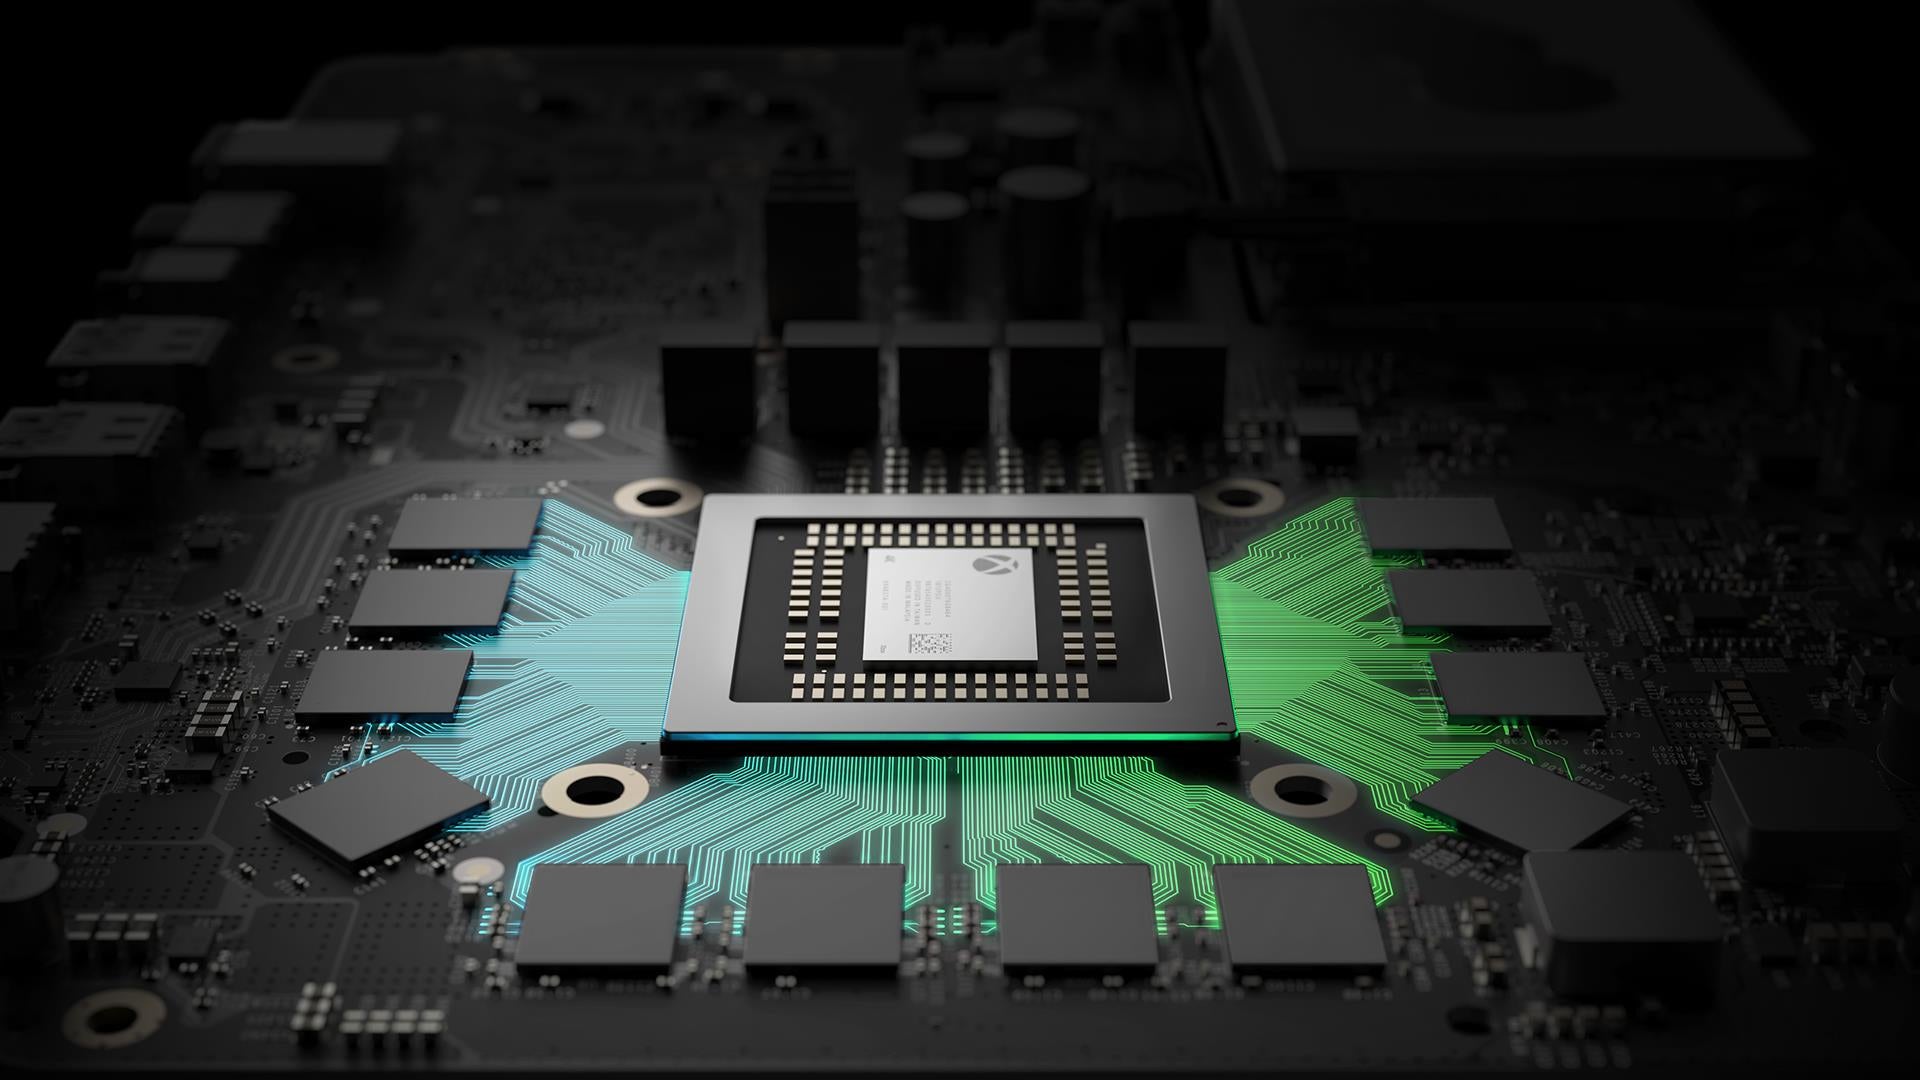 Image for Xbox Scorpio will have "the very best console version of games" this year, says Phil Spencer